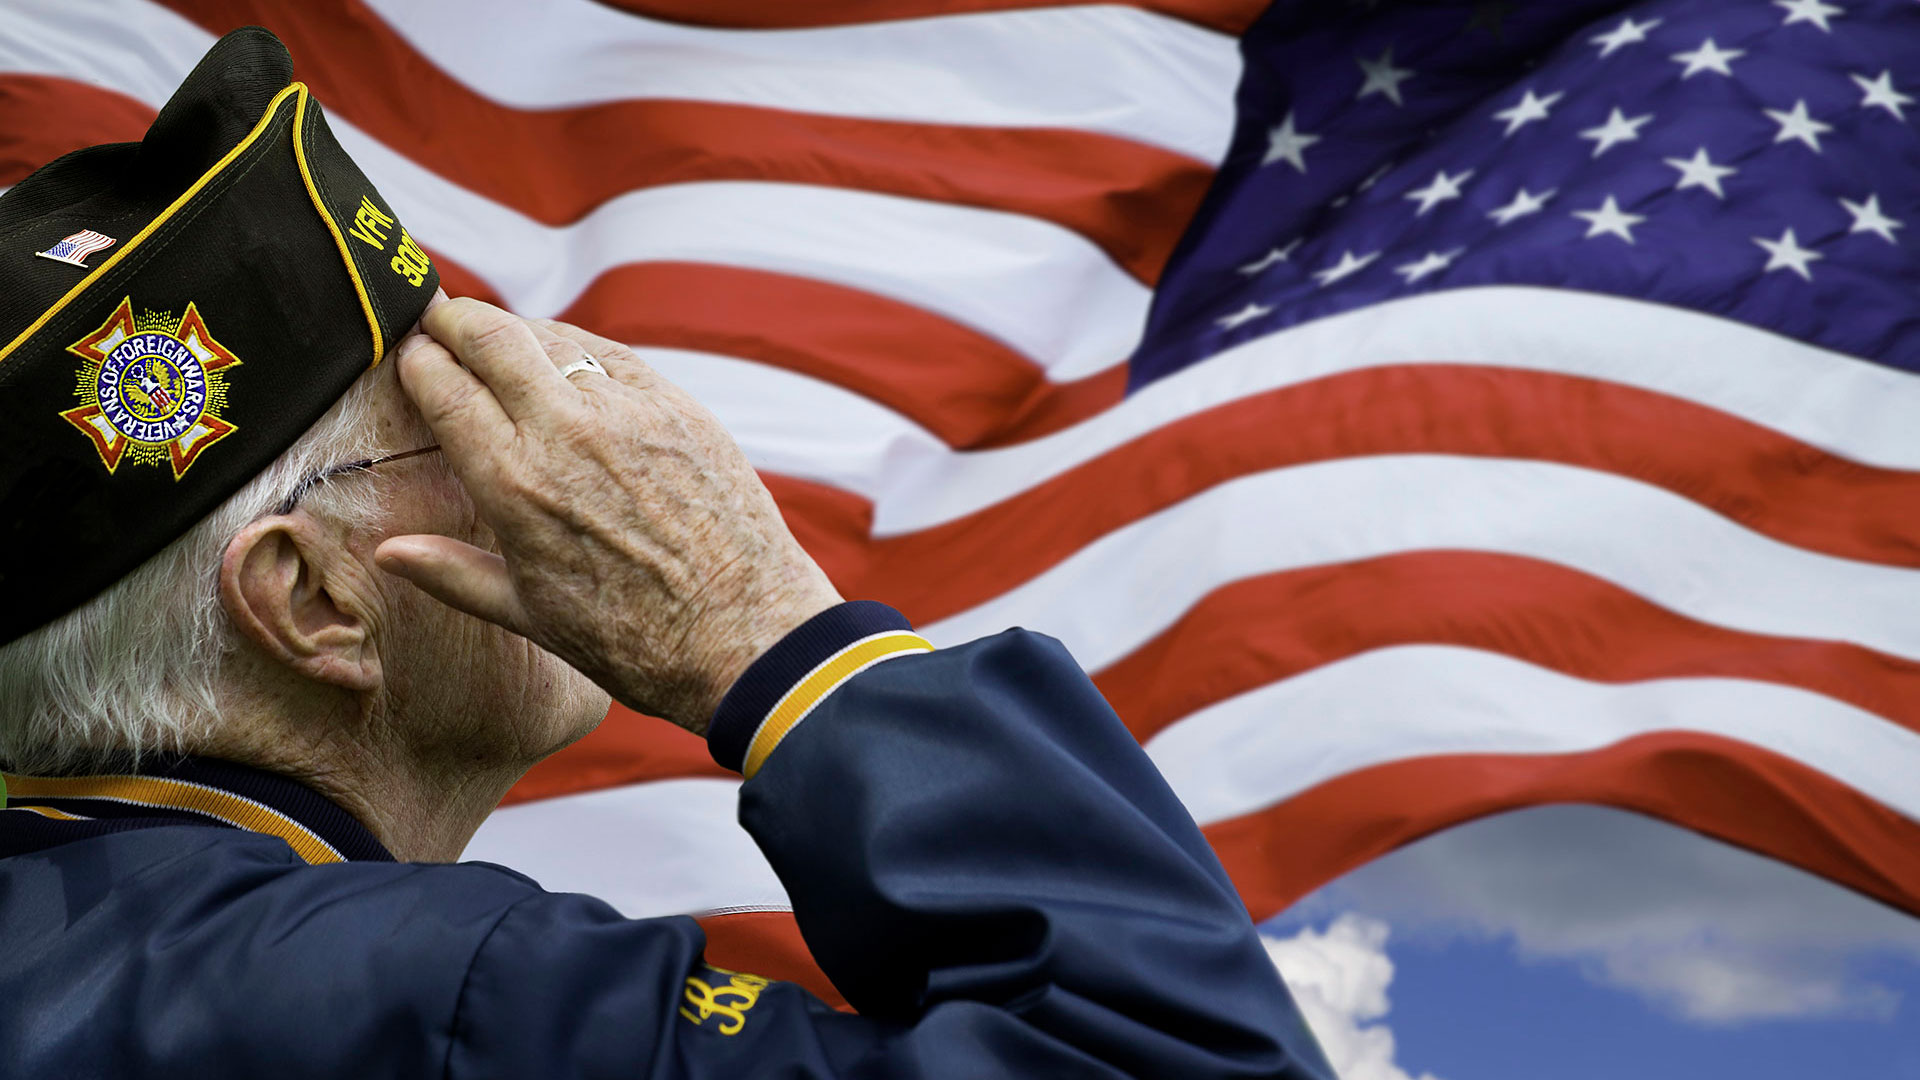 A Veteran saluting to the American flag